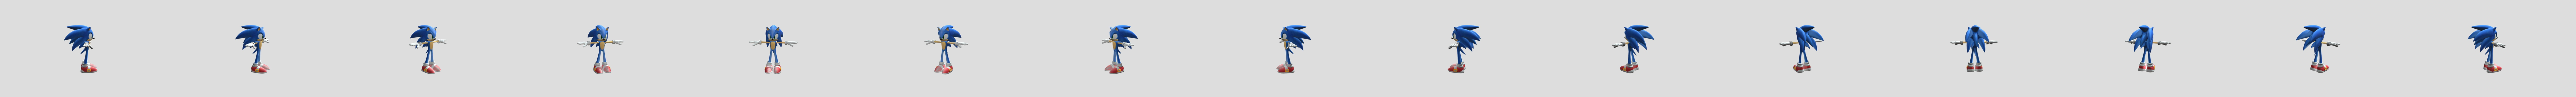 Xbox 360 - Sonic The Hedgehog 2006 - Sonic - Download Free 3D model by  SonicModelArchive (@Gabby.Sanabria.de.Geraci) [8aad0bd]